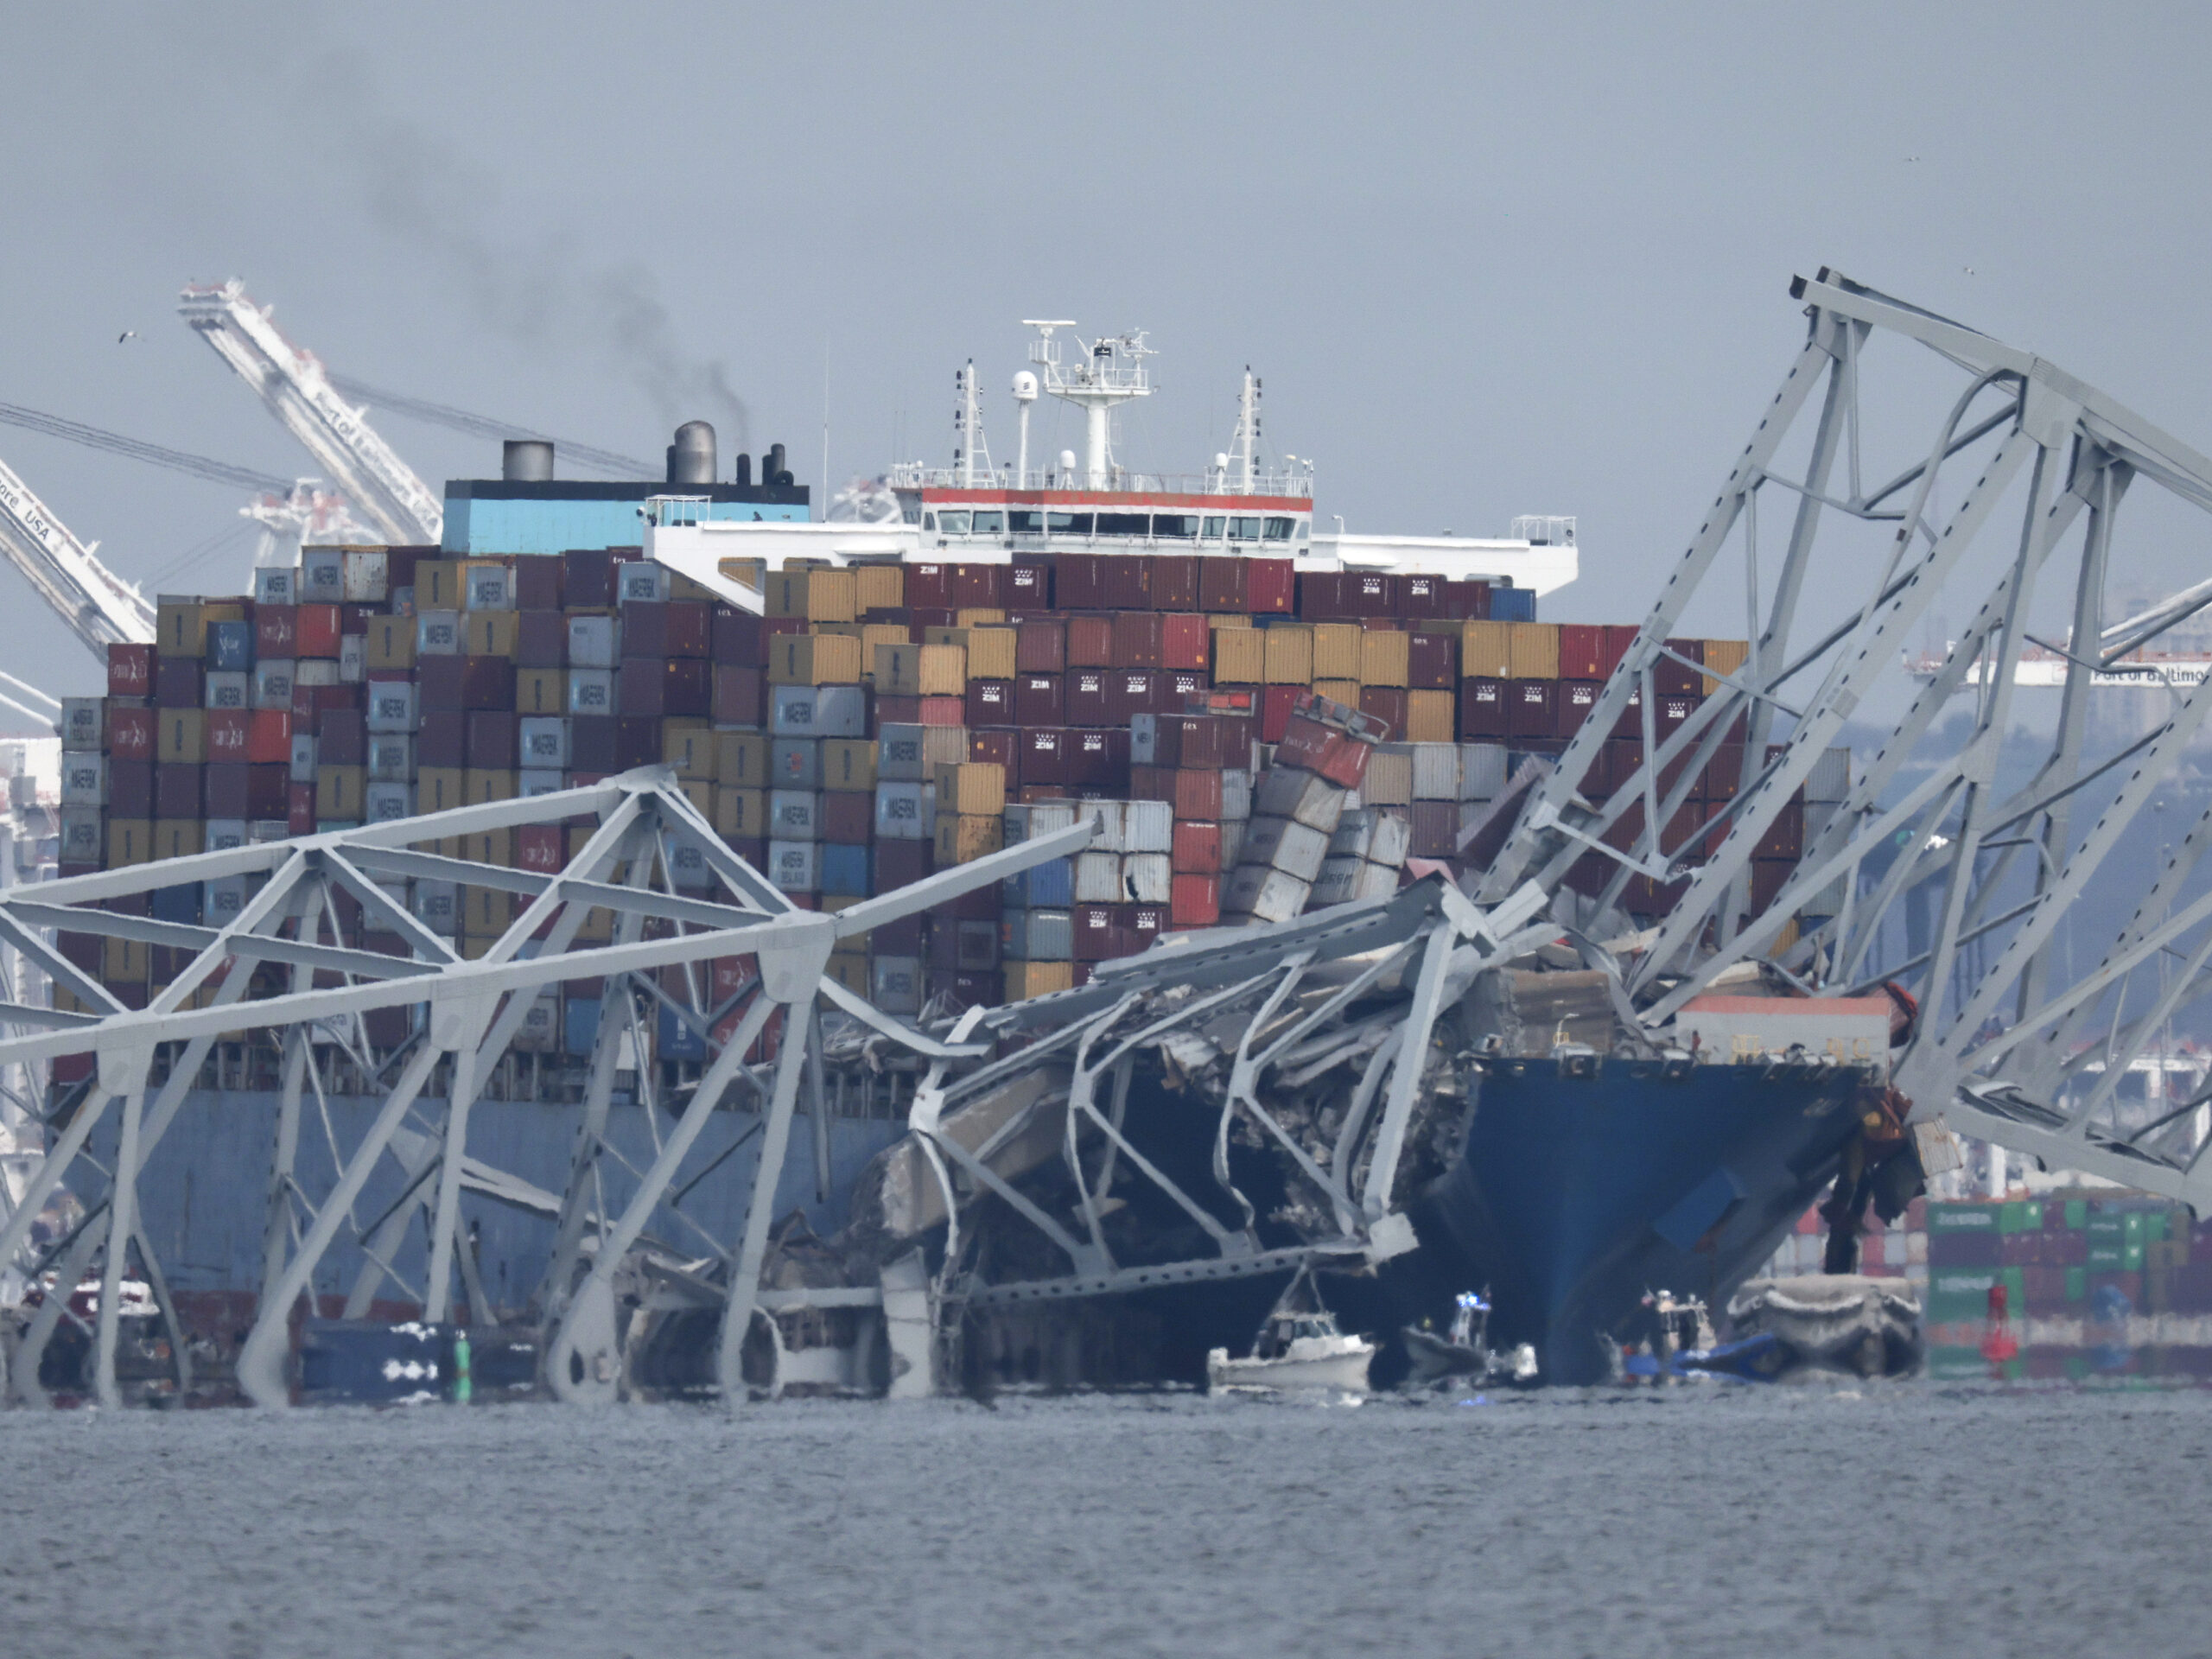 Loss of ship’s power and stiff current may have led to bridge collision, experts say